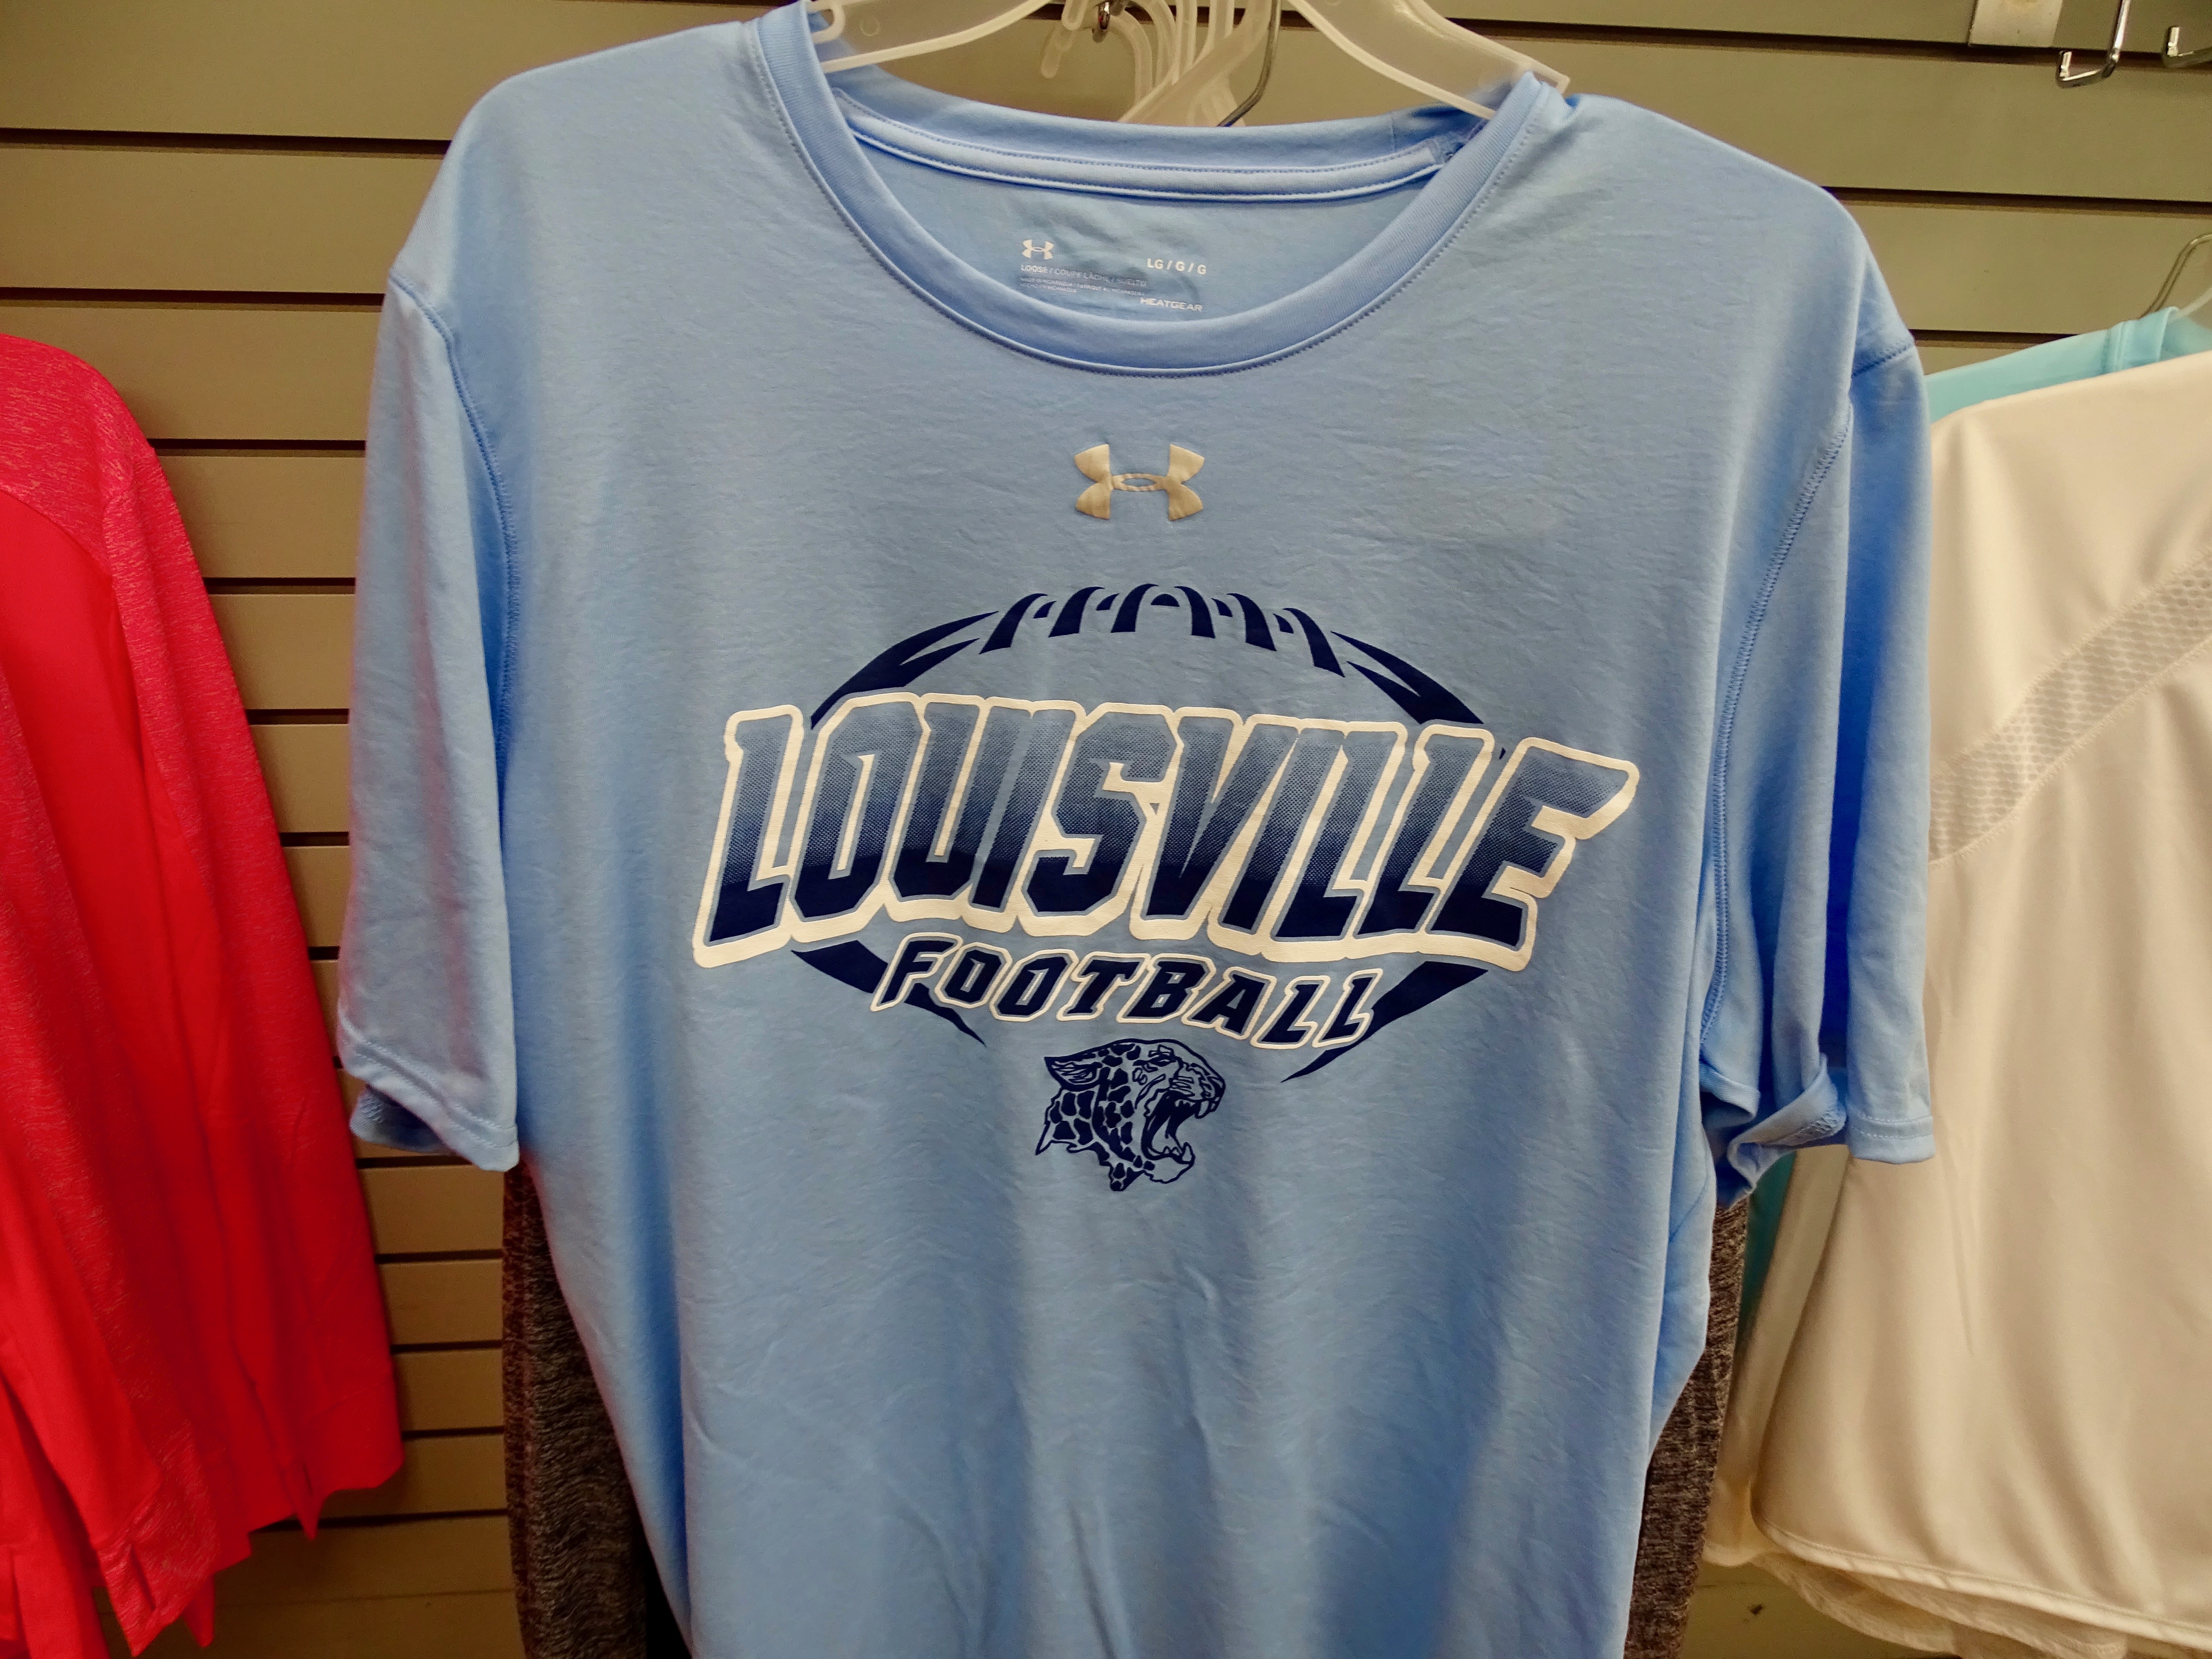 LOUISVILLE LEOPARDS youth lrg T shirt football tradition OHIO kids